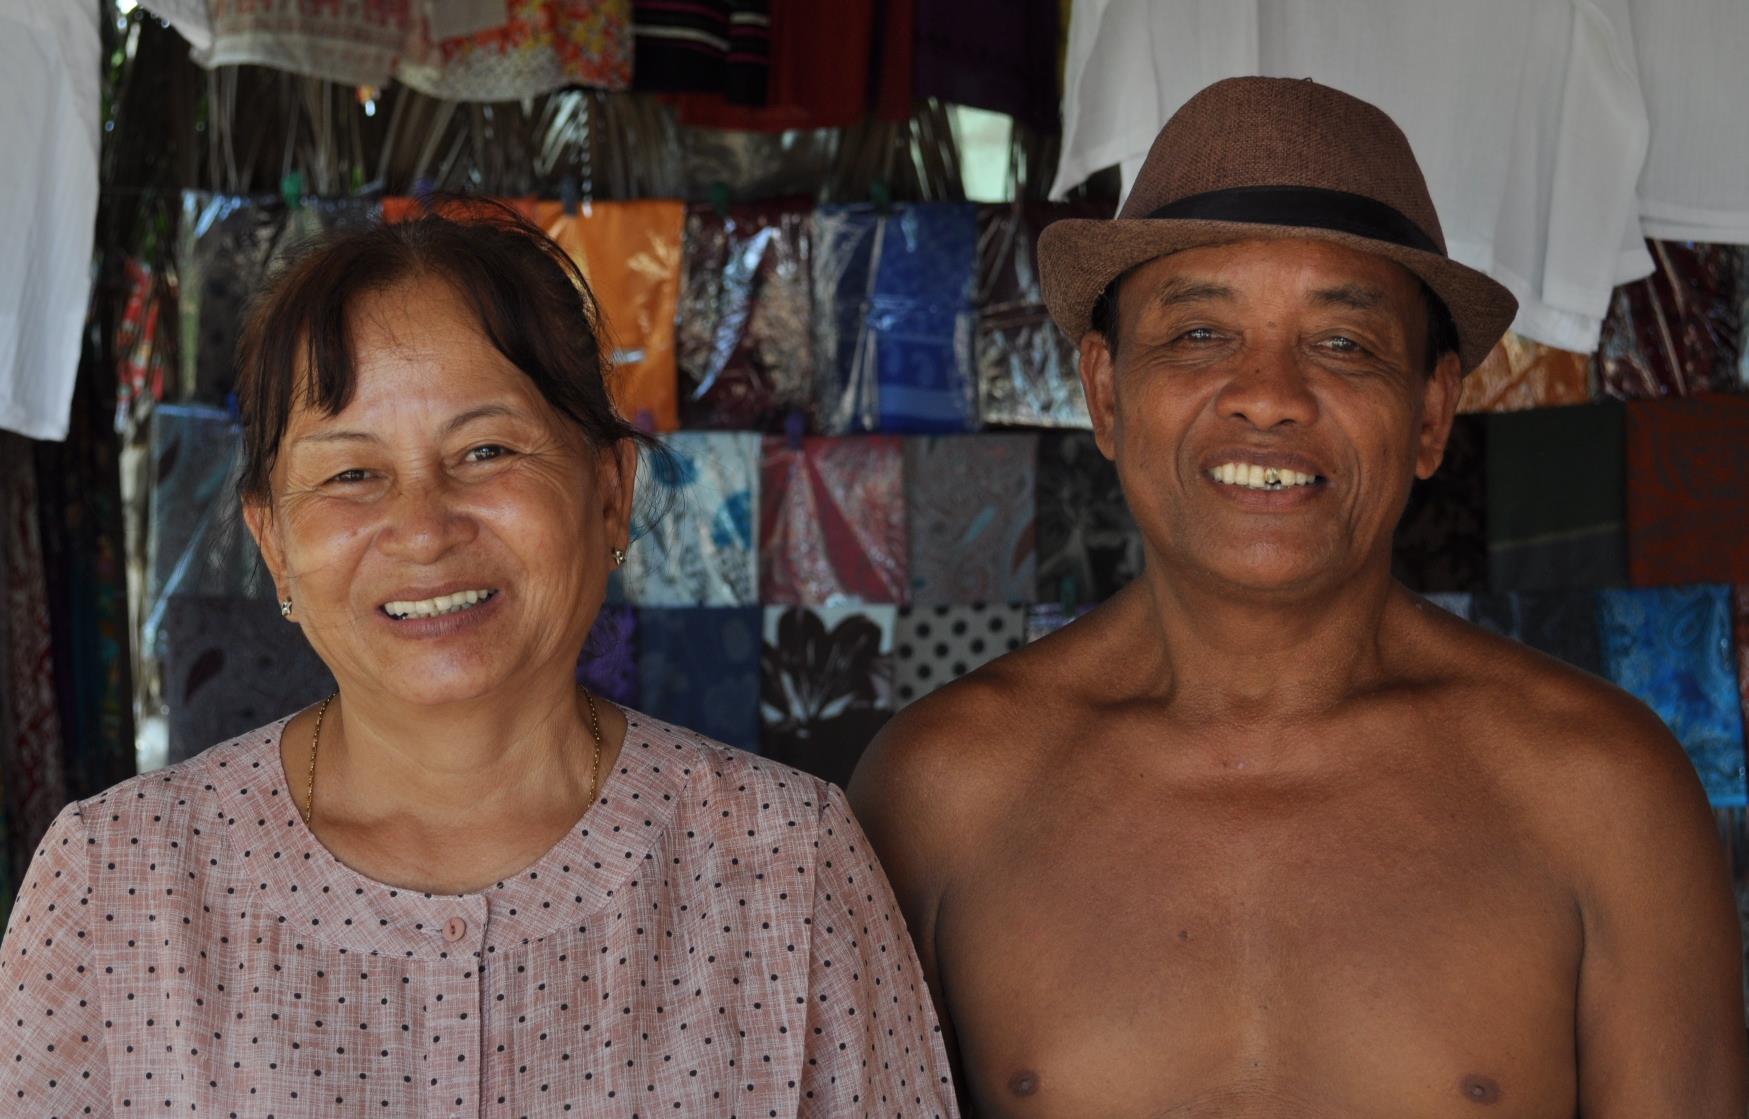 ‘All you need to have is a lovely smile for a pose’. Shop owners at the Bamboo Train station platform, Battambang, Cambodia.